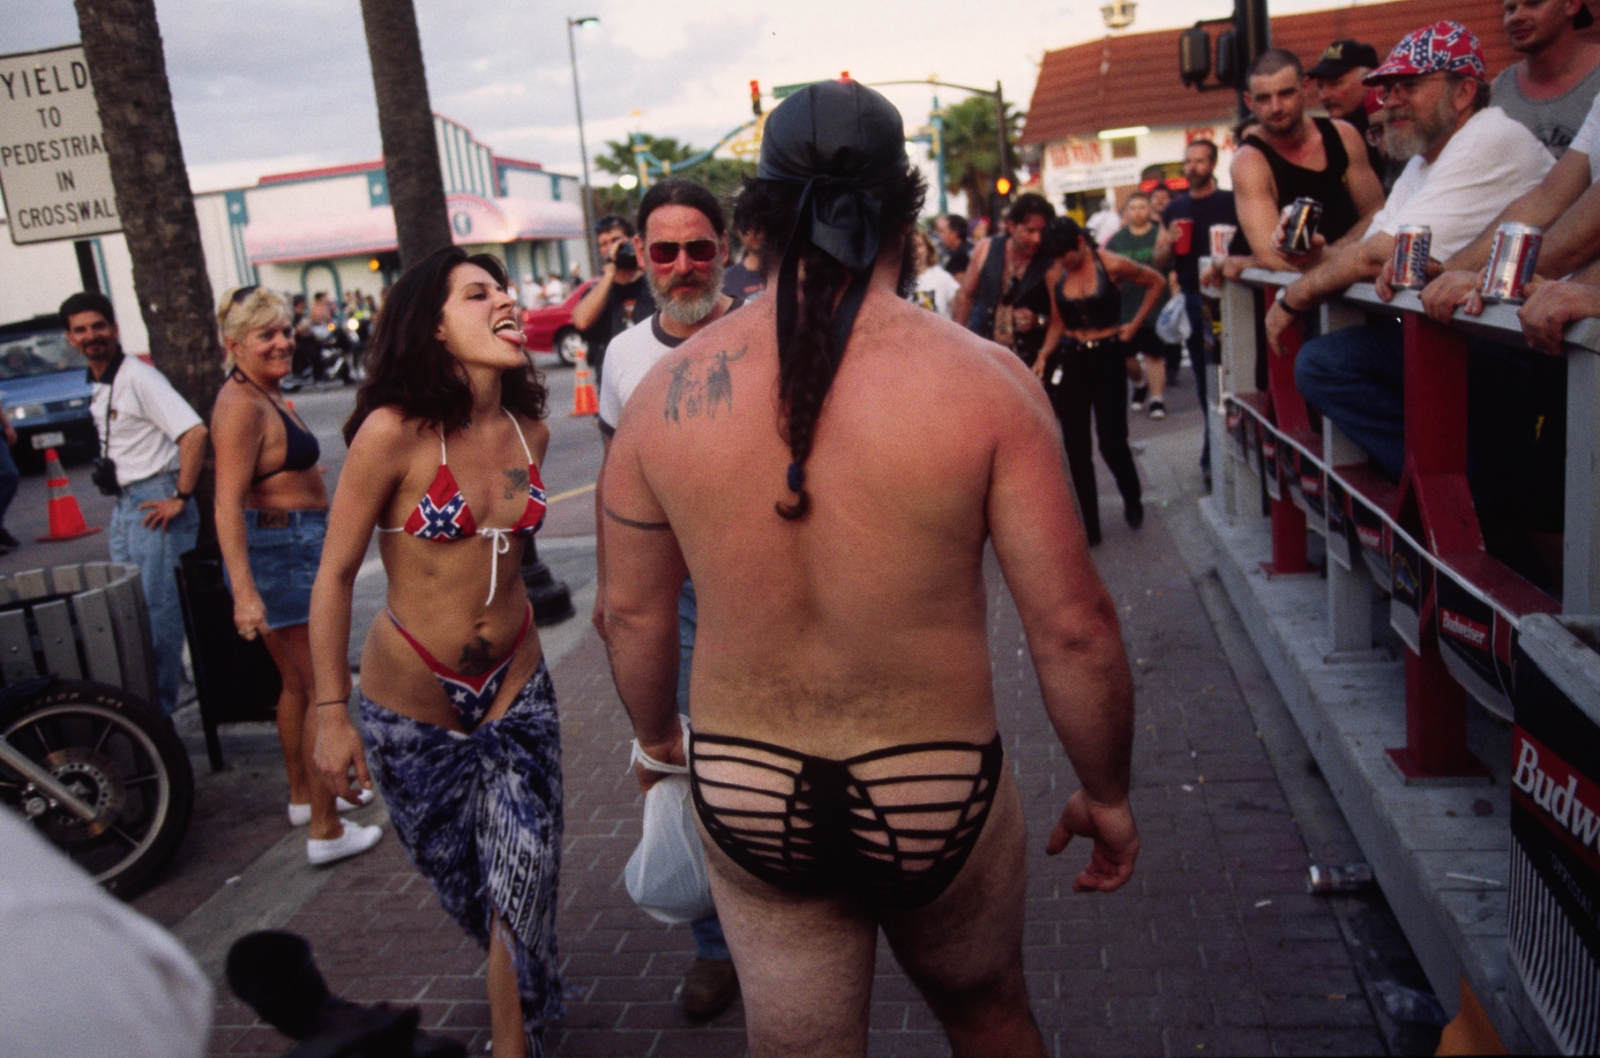 Bike Week - This biker's outfit created a stir as he walked along...